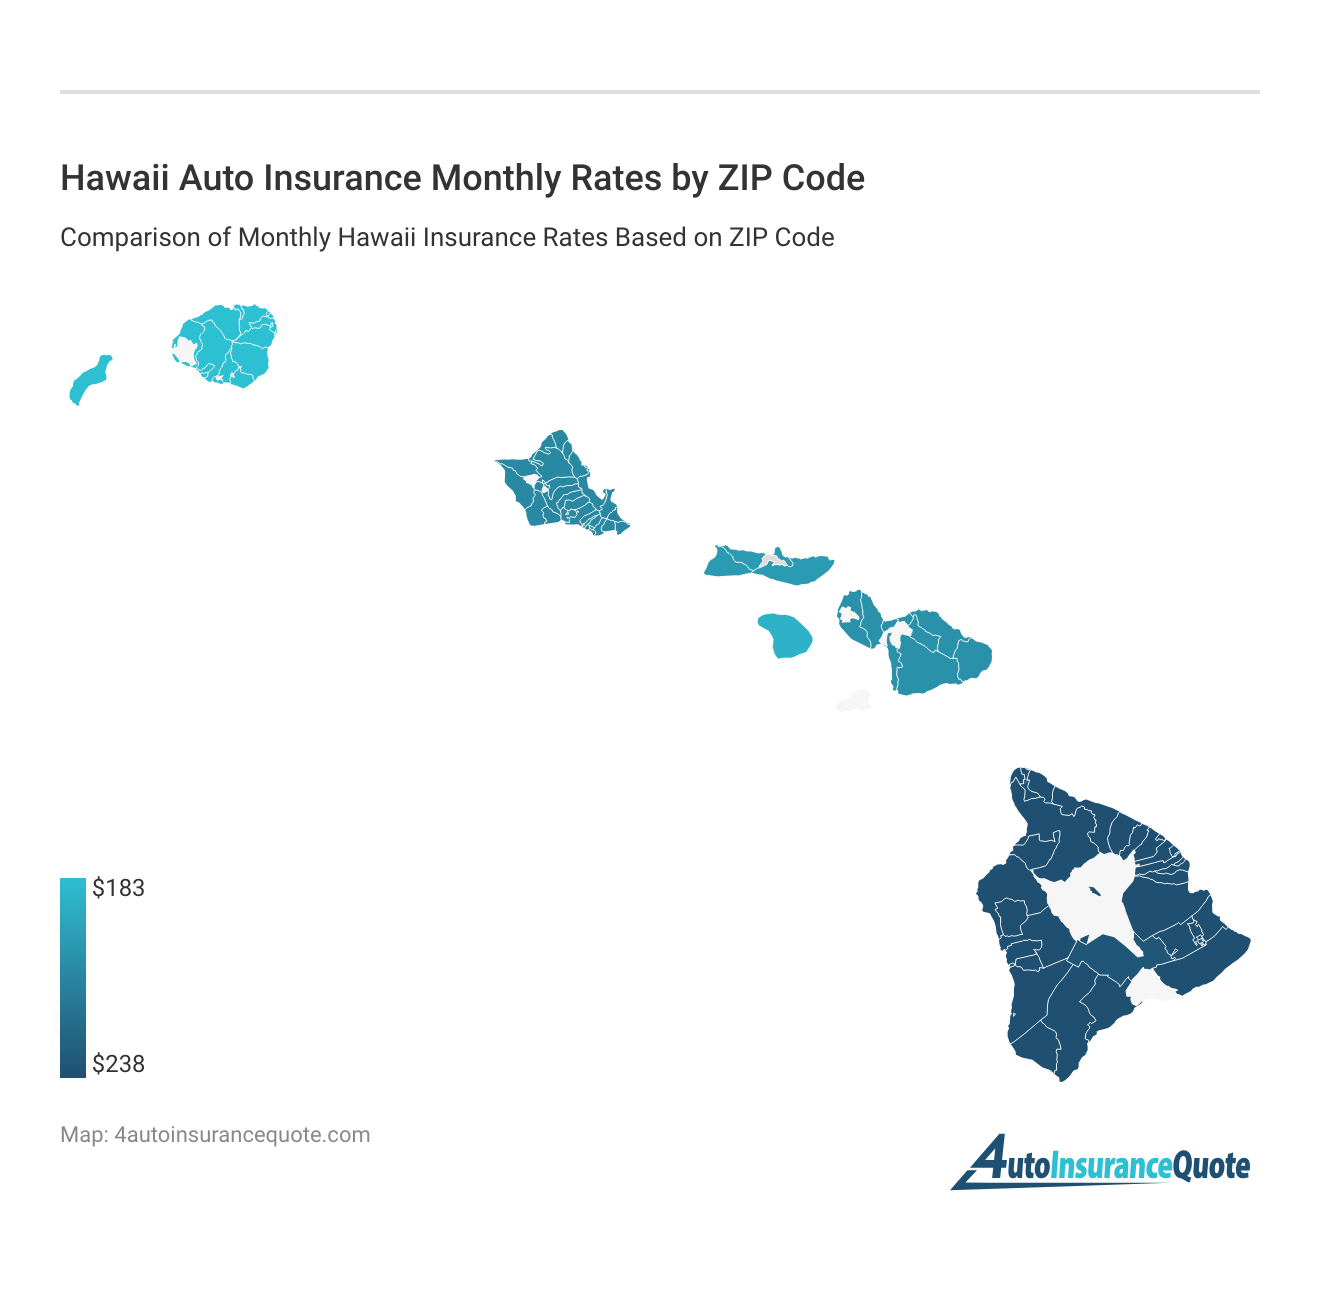 <h3>Hawaii Auto Insurance Monthly Rates by ZIP Code</h3>